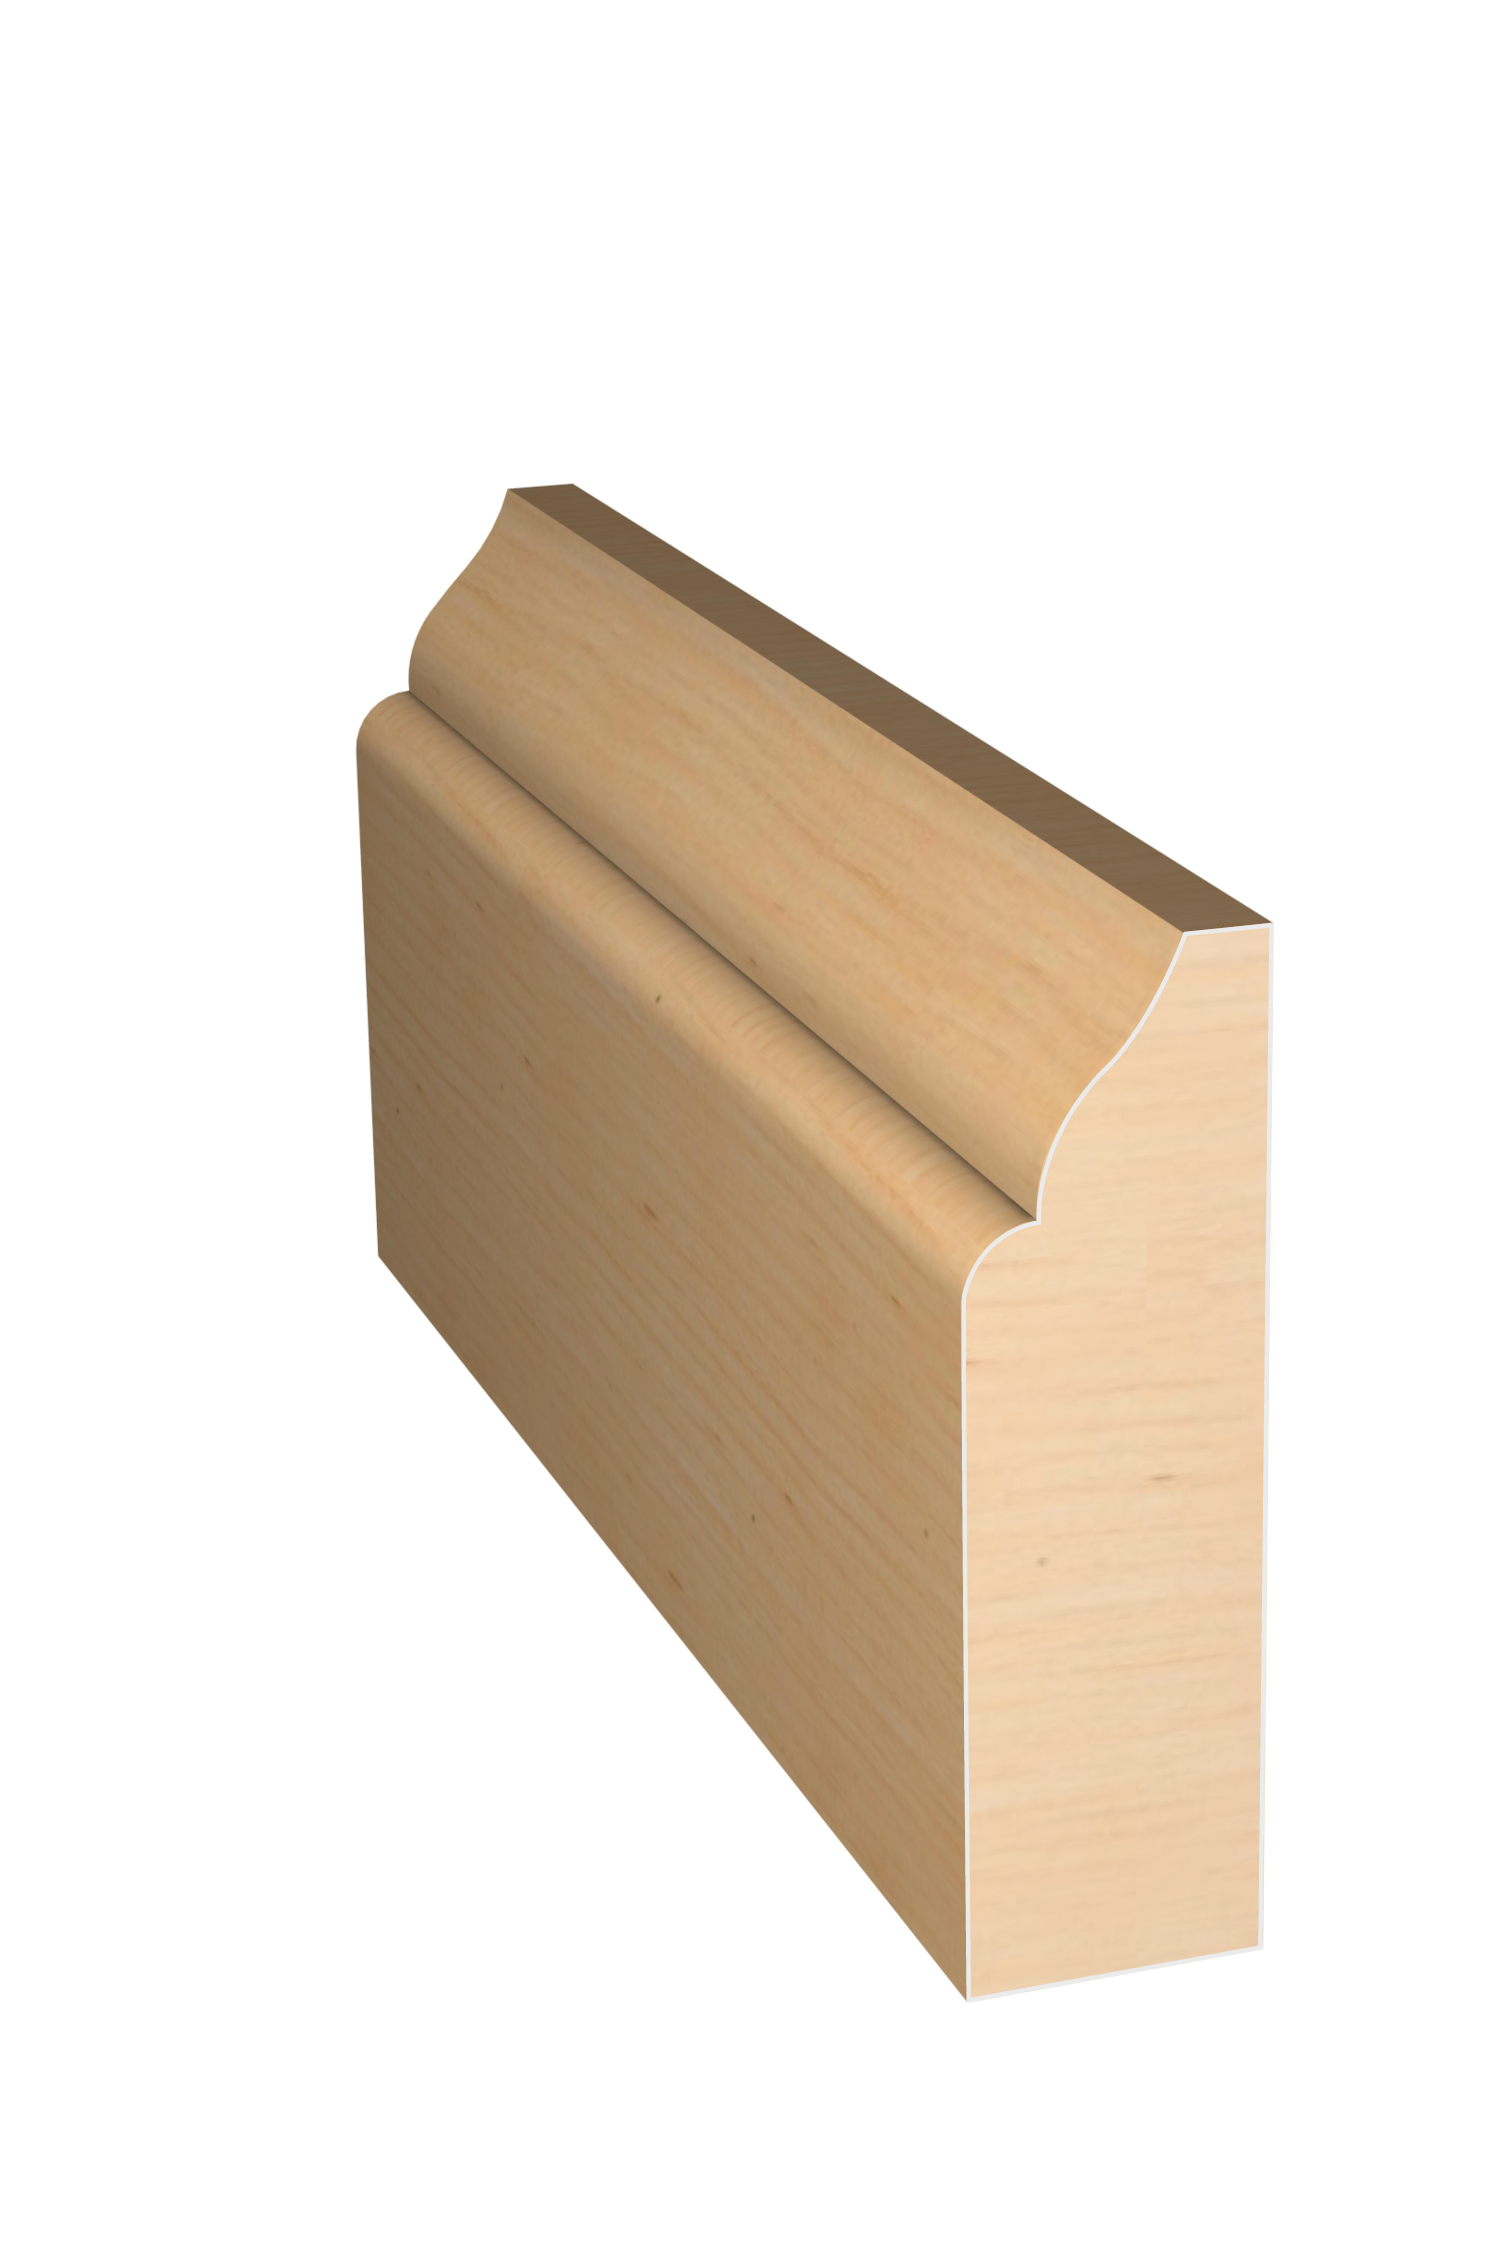 Three dimensional rendering of custom casing wood molding CAPL23411 made by Public Lumber Company in Detroit.